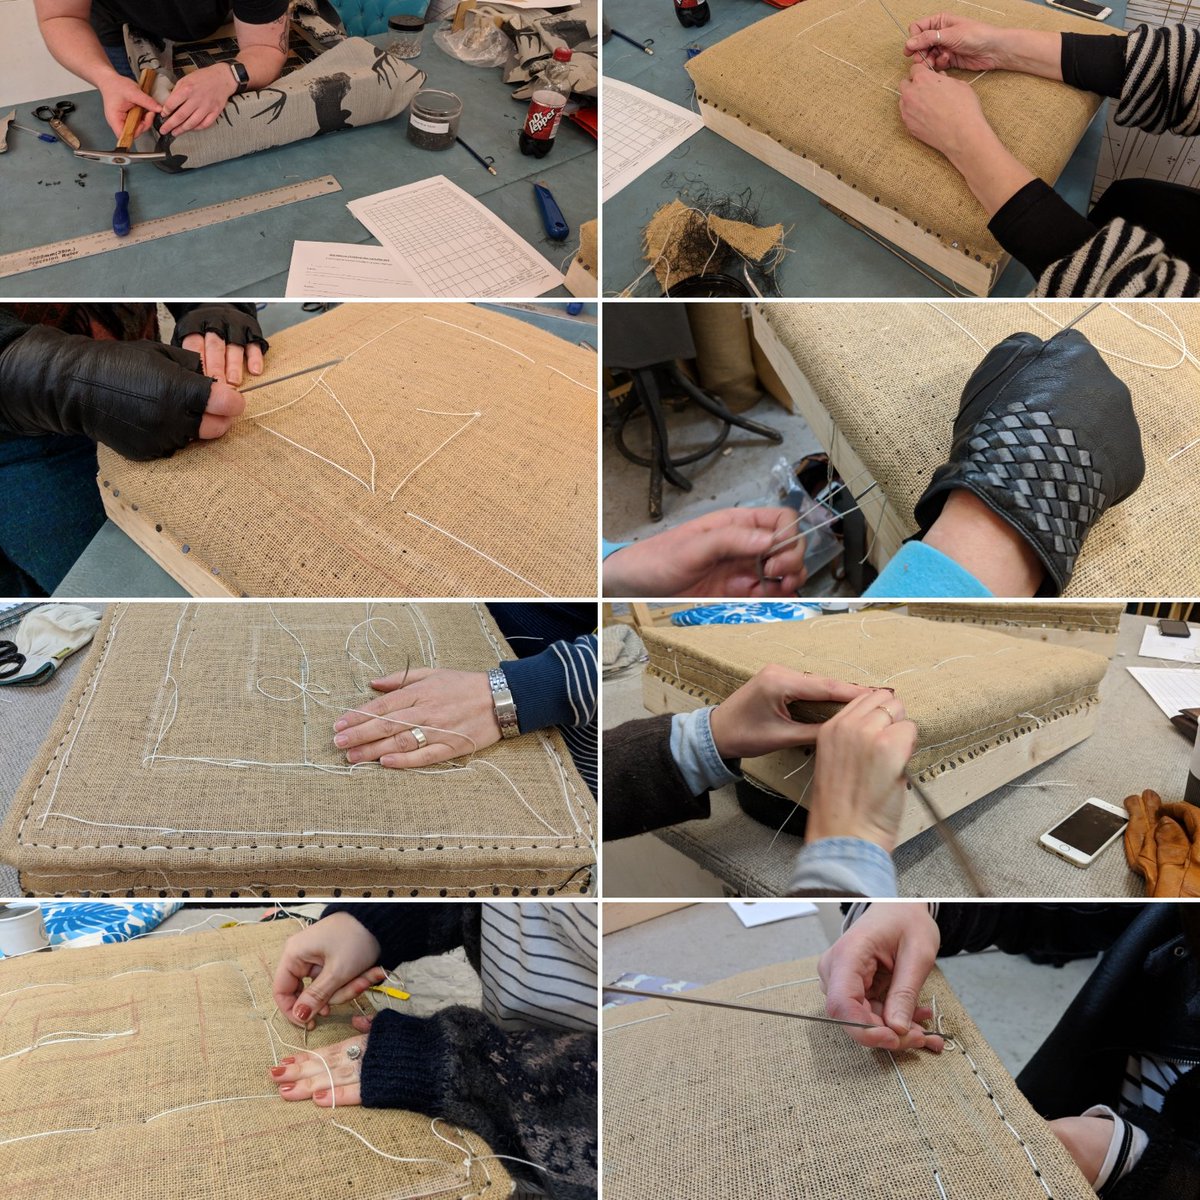 Many Hands and a whole array of gloves in class today at Bristol Upholstery Collective! @BristolChairs #upholsteryschool #bristol #learnsnewskill #traditionalupholstery #craft